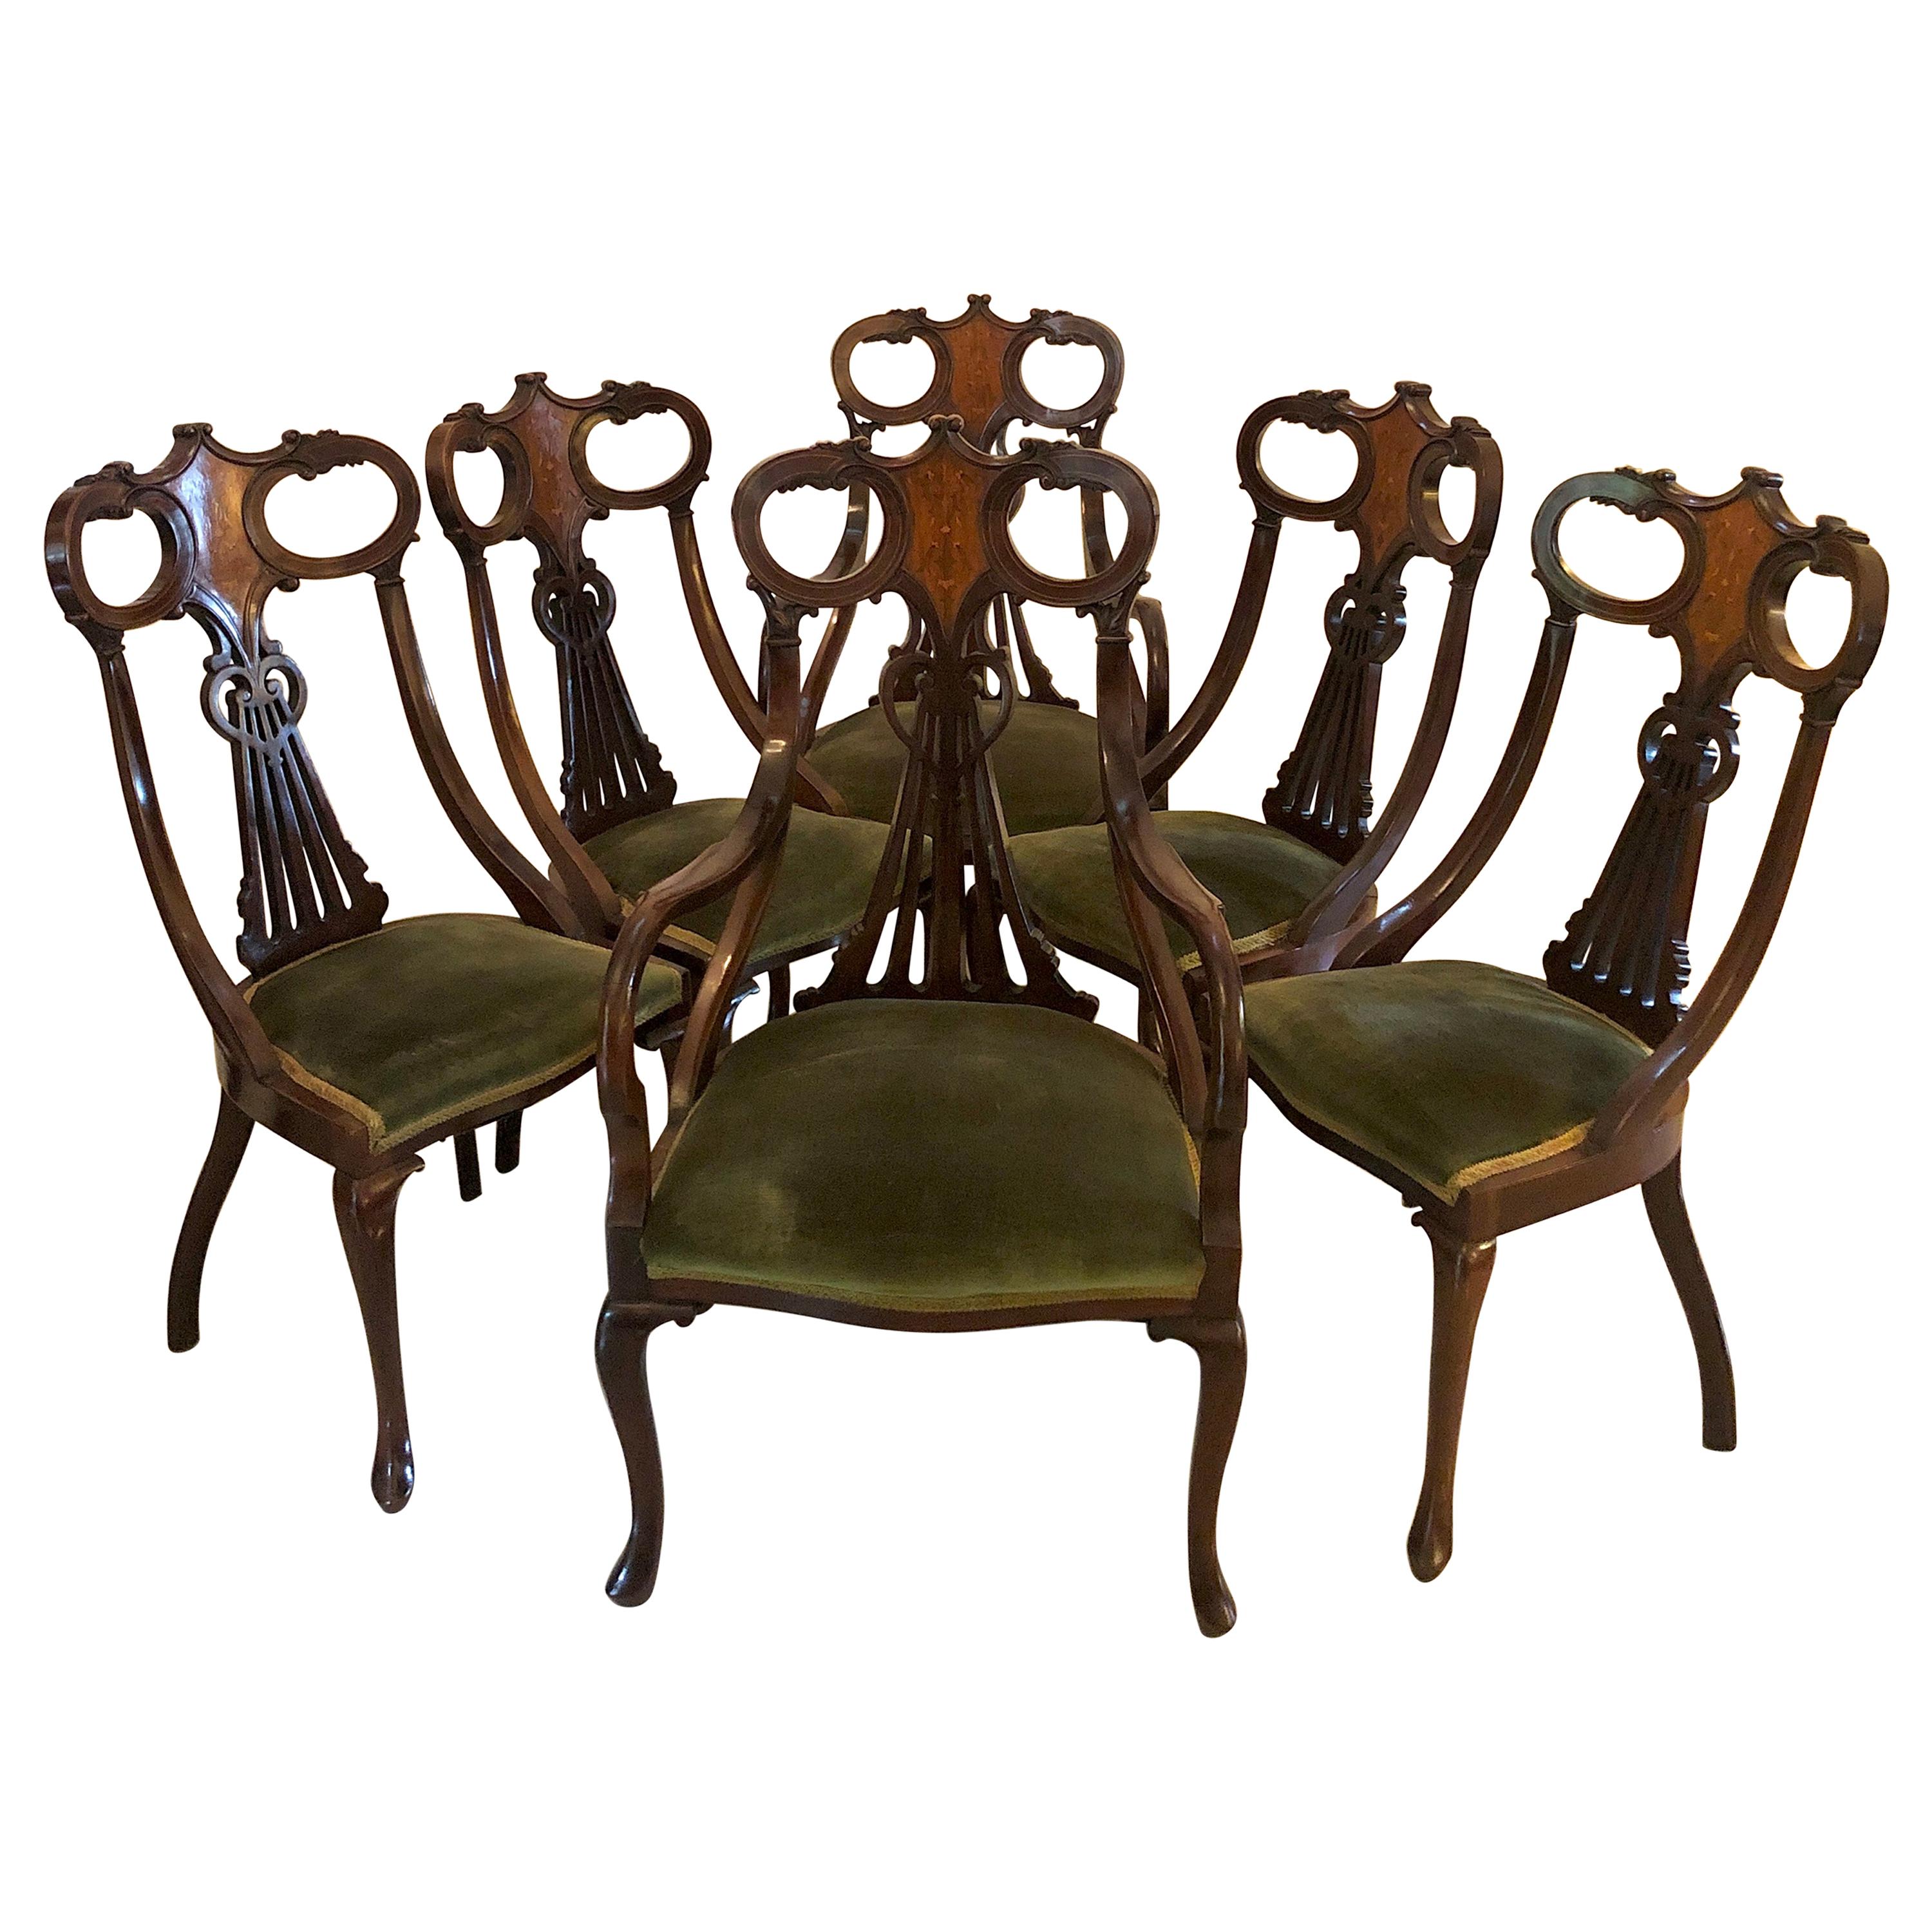 Unusual Set of Six Antique Mahogany Inlaid Dining Chairs